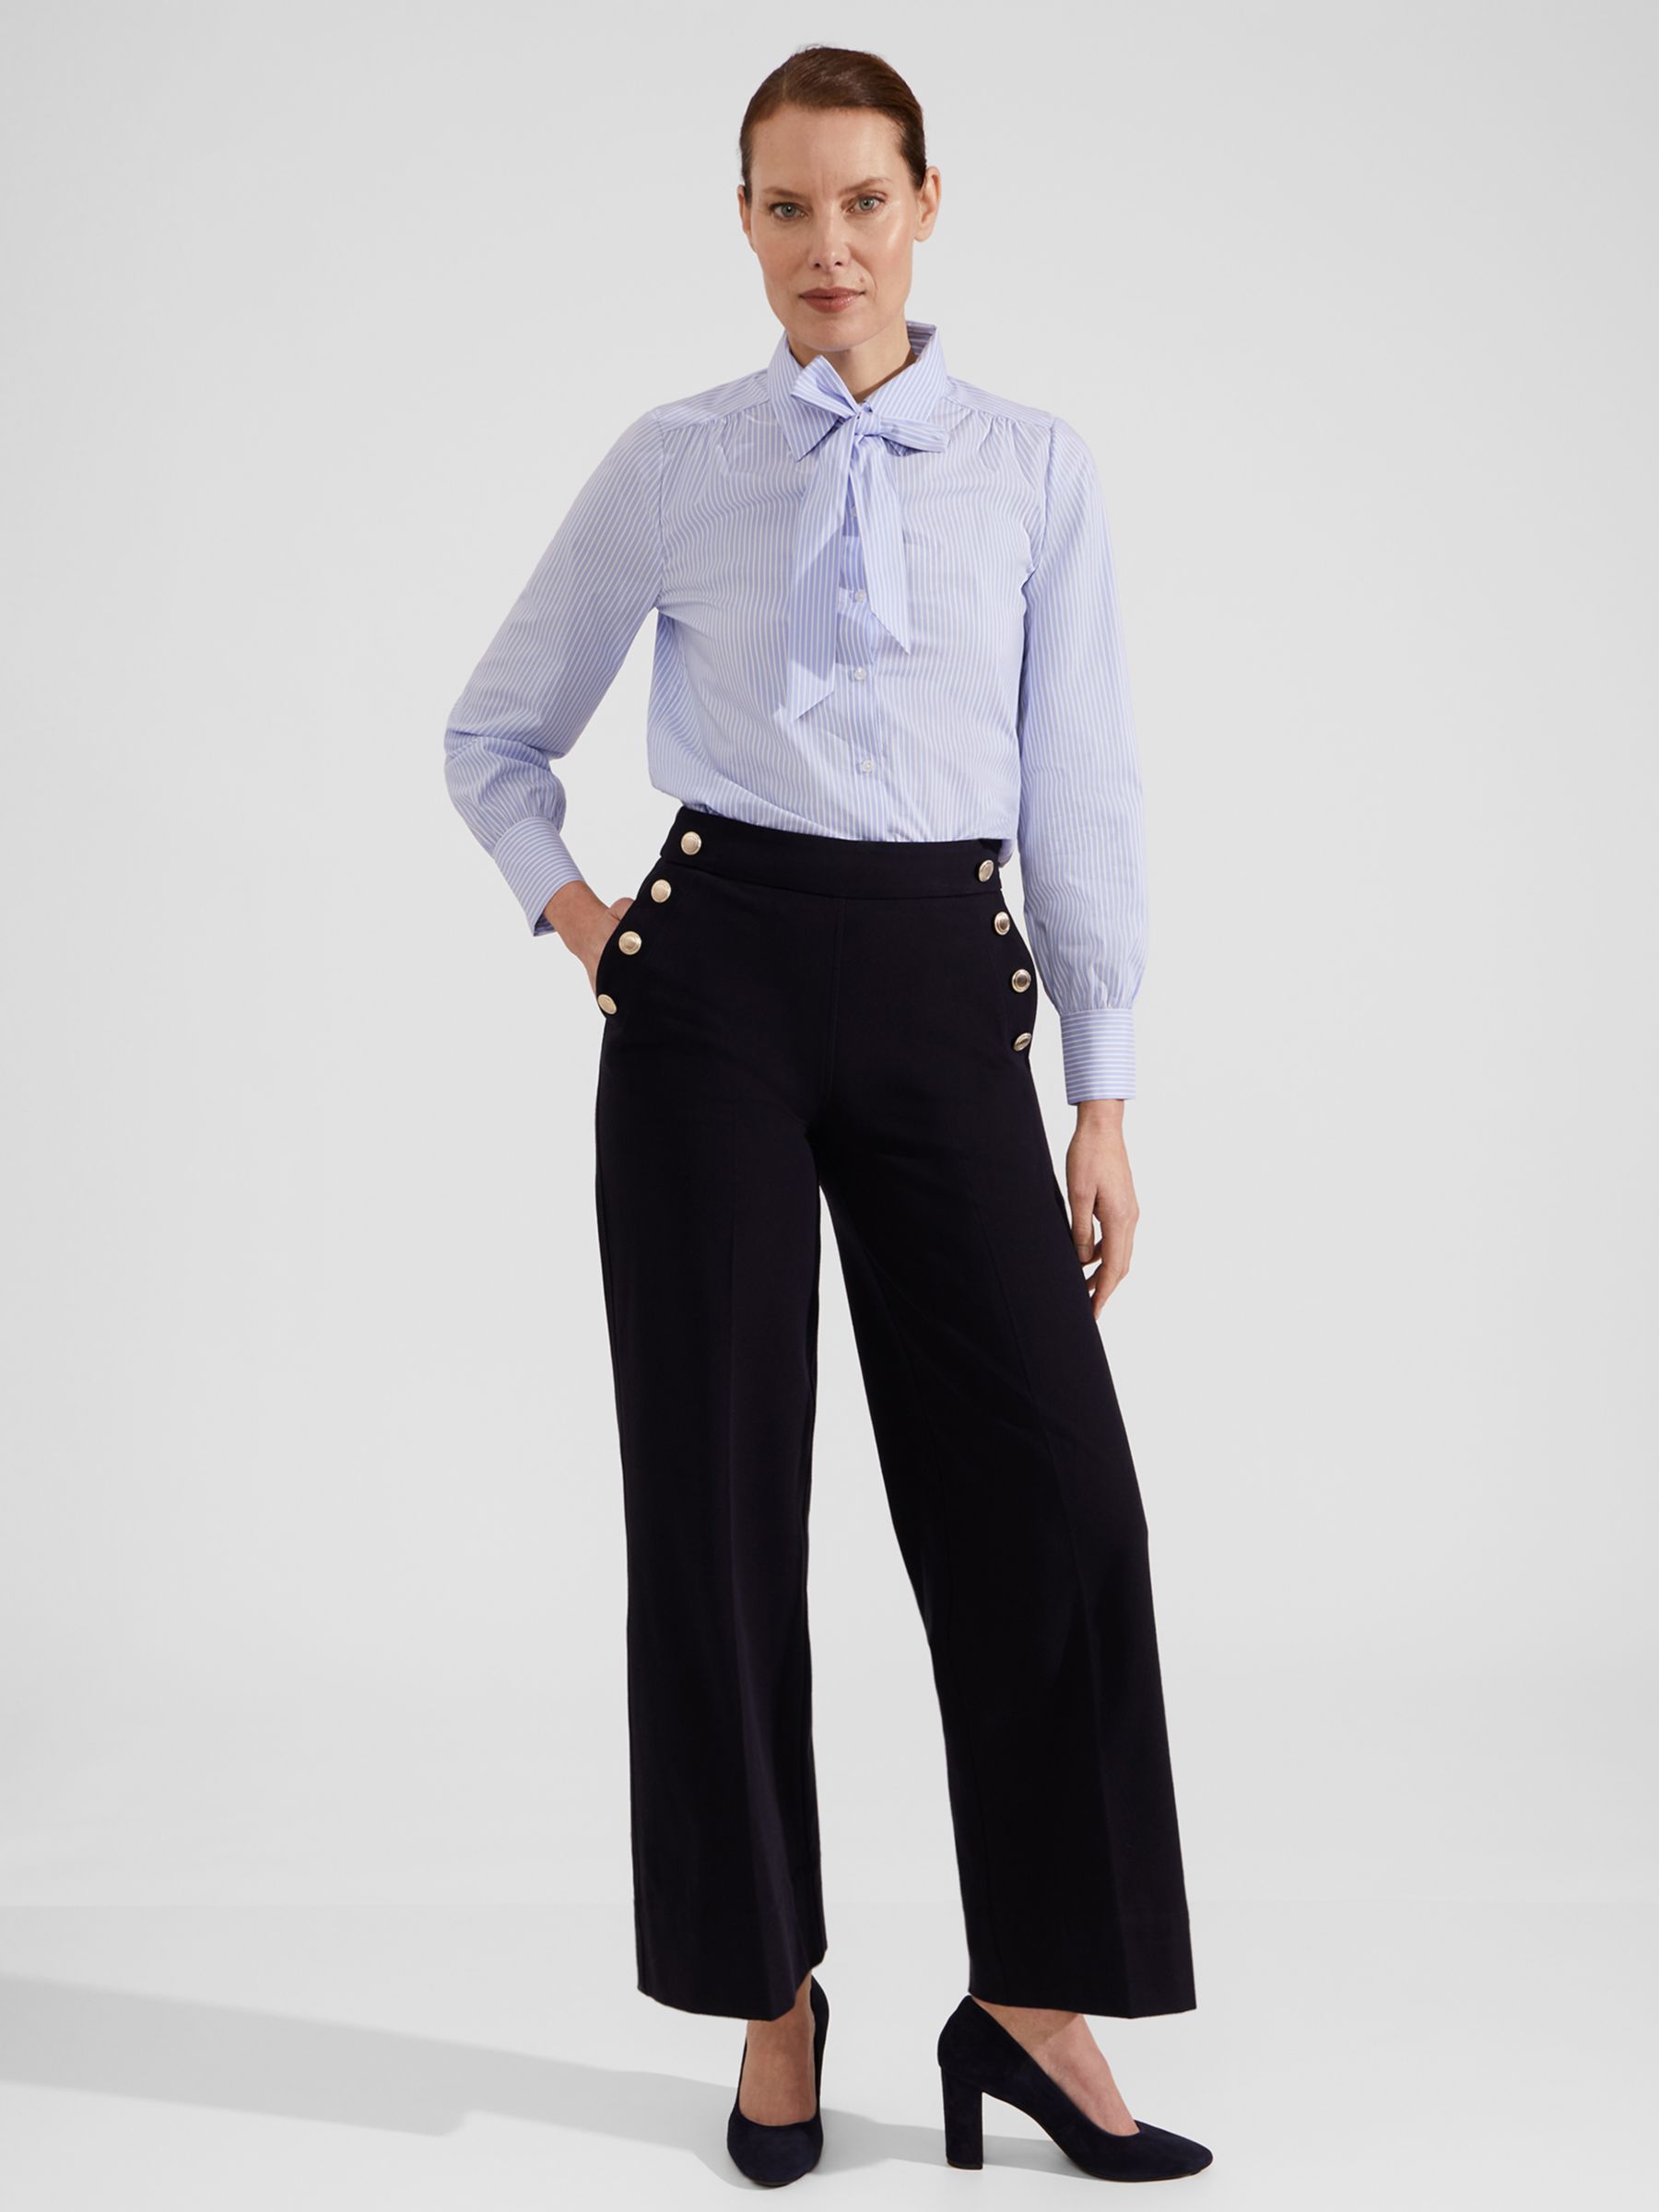 Hobbs Laurie Tie Neck Shirt, Blue/Ivory at John Lewis & Partners